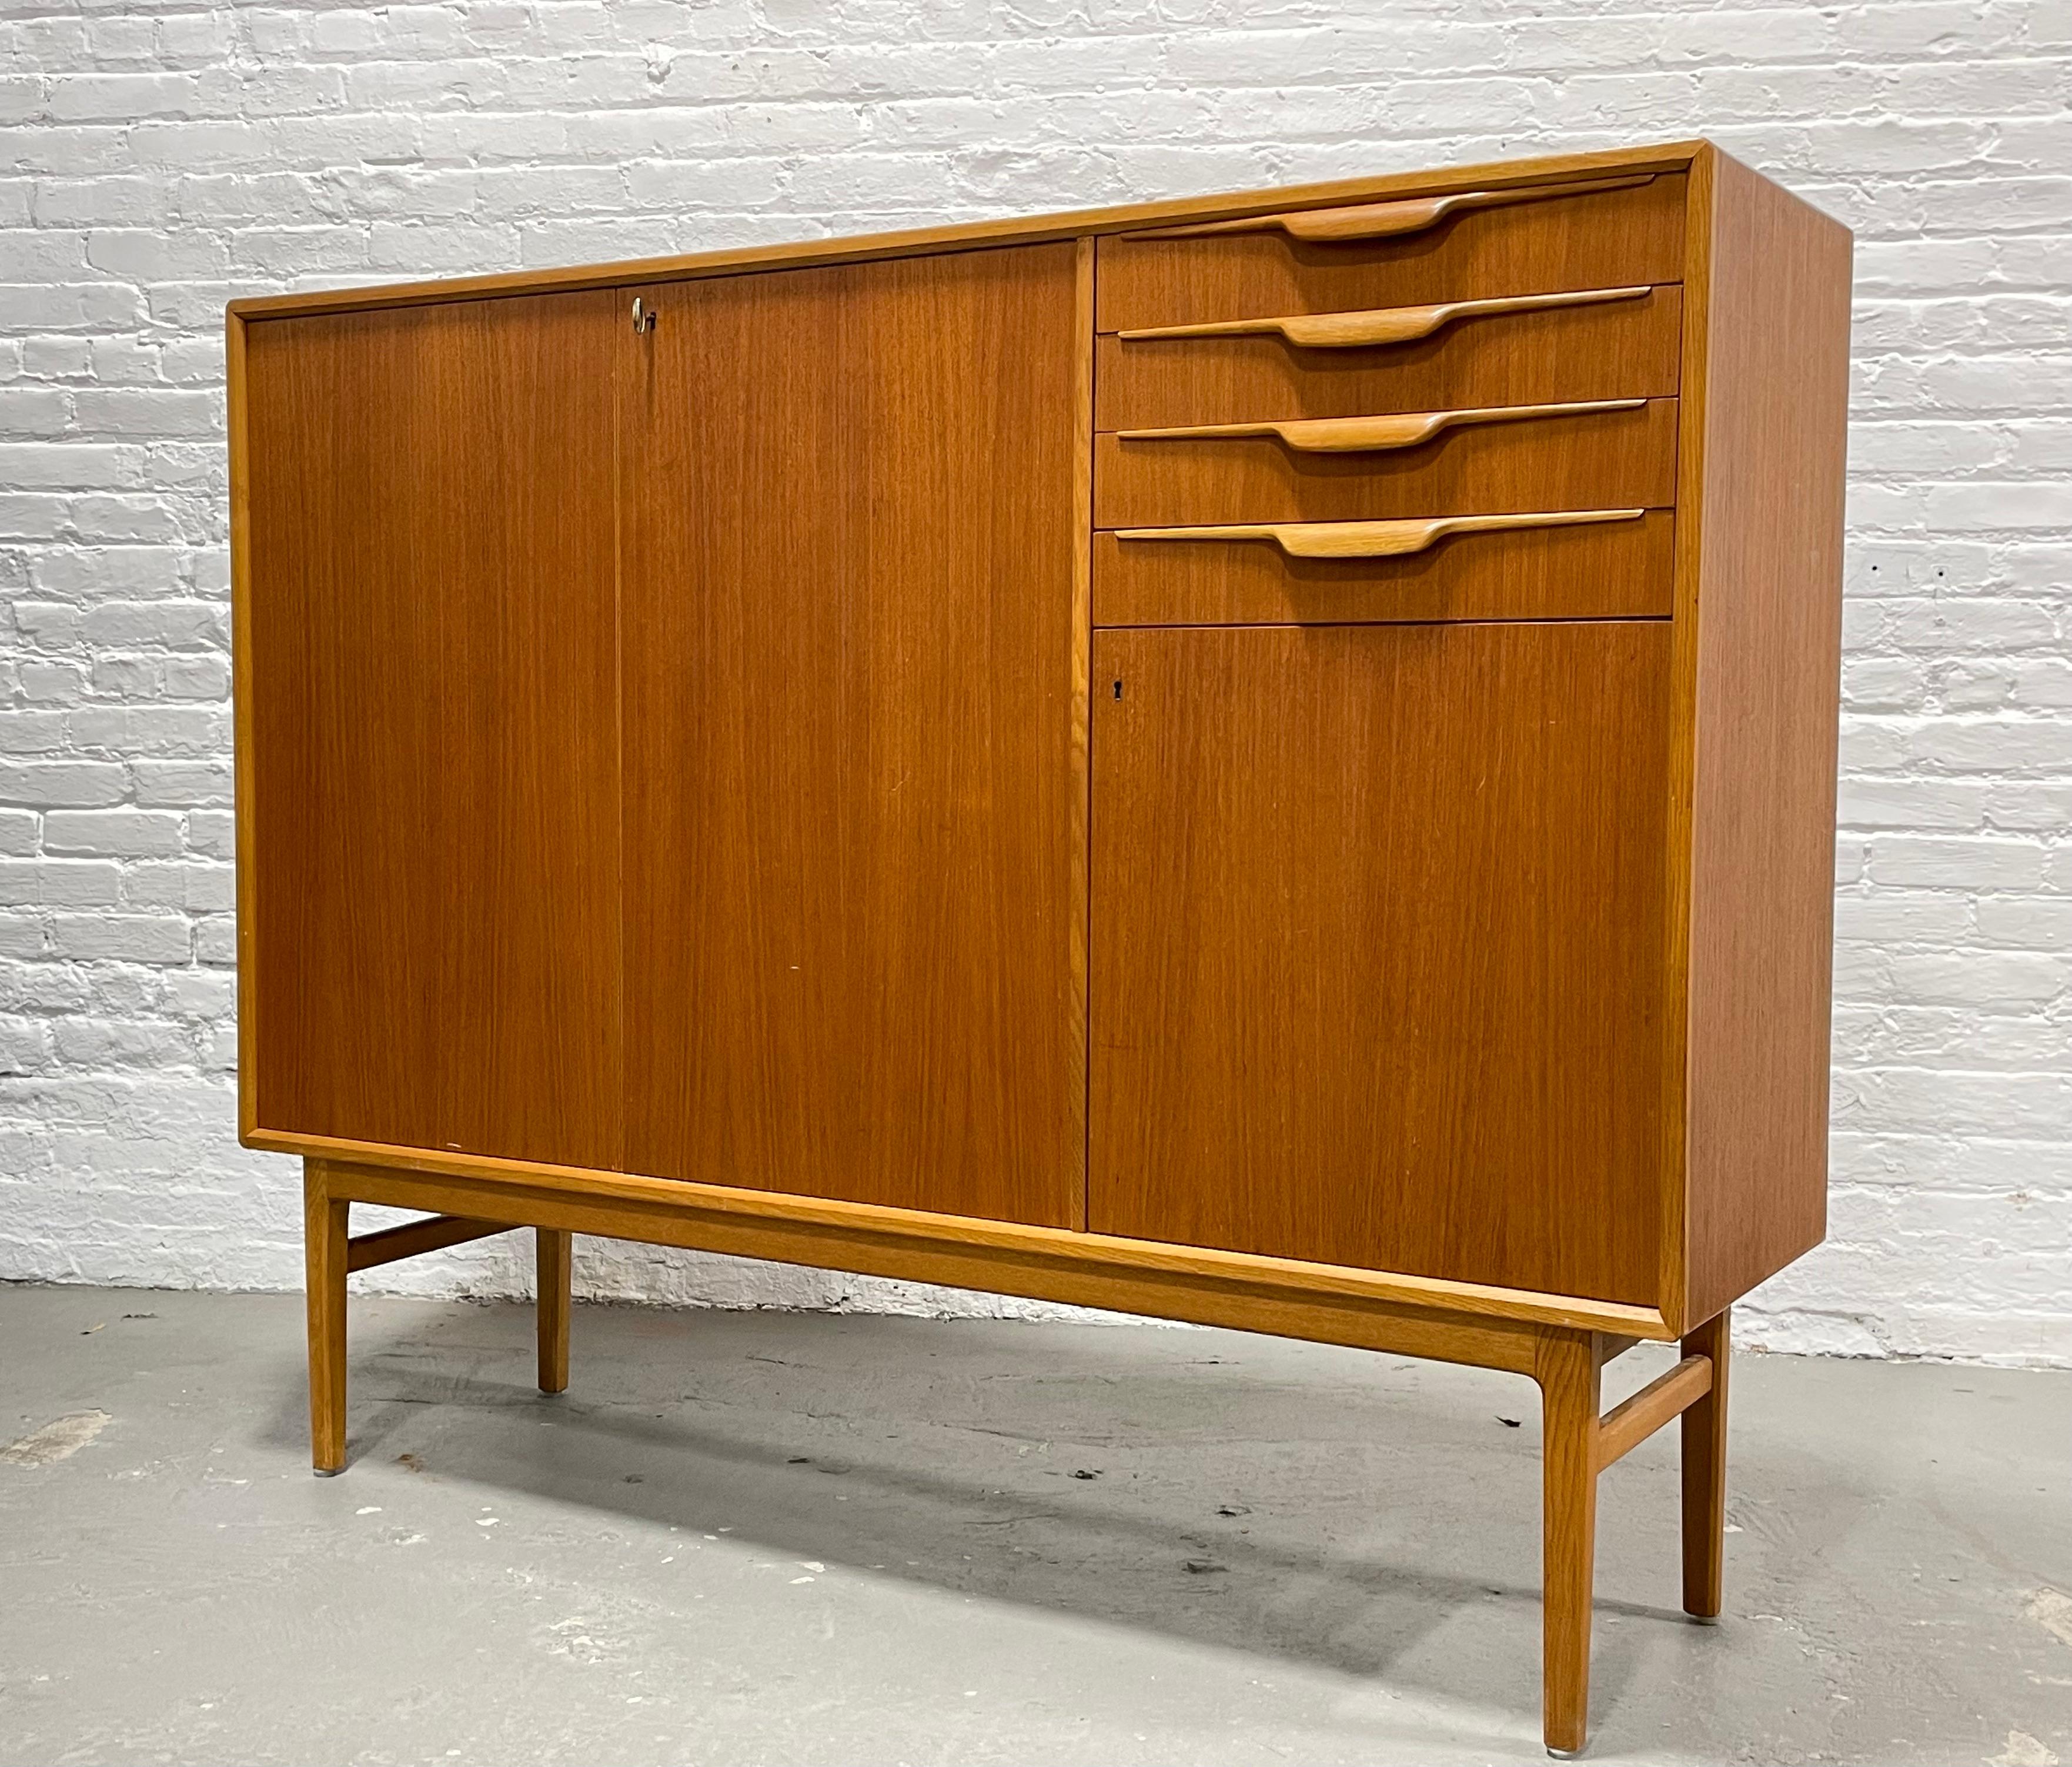 Mid-Century Modern Danish teak highboard credenza / sideboard by Beril Fridhagen for Bodafors, c. 1960's. This incredible piece is gorgeous in its simple yet extremely functional design. This beauty offers double lockable doors (key included!) with